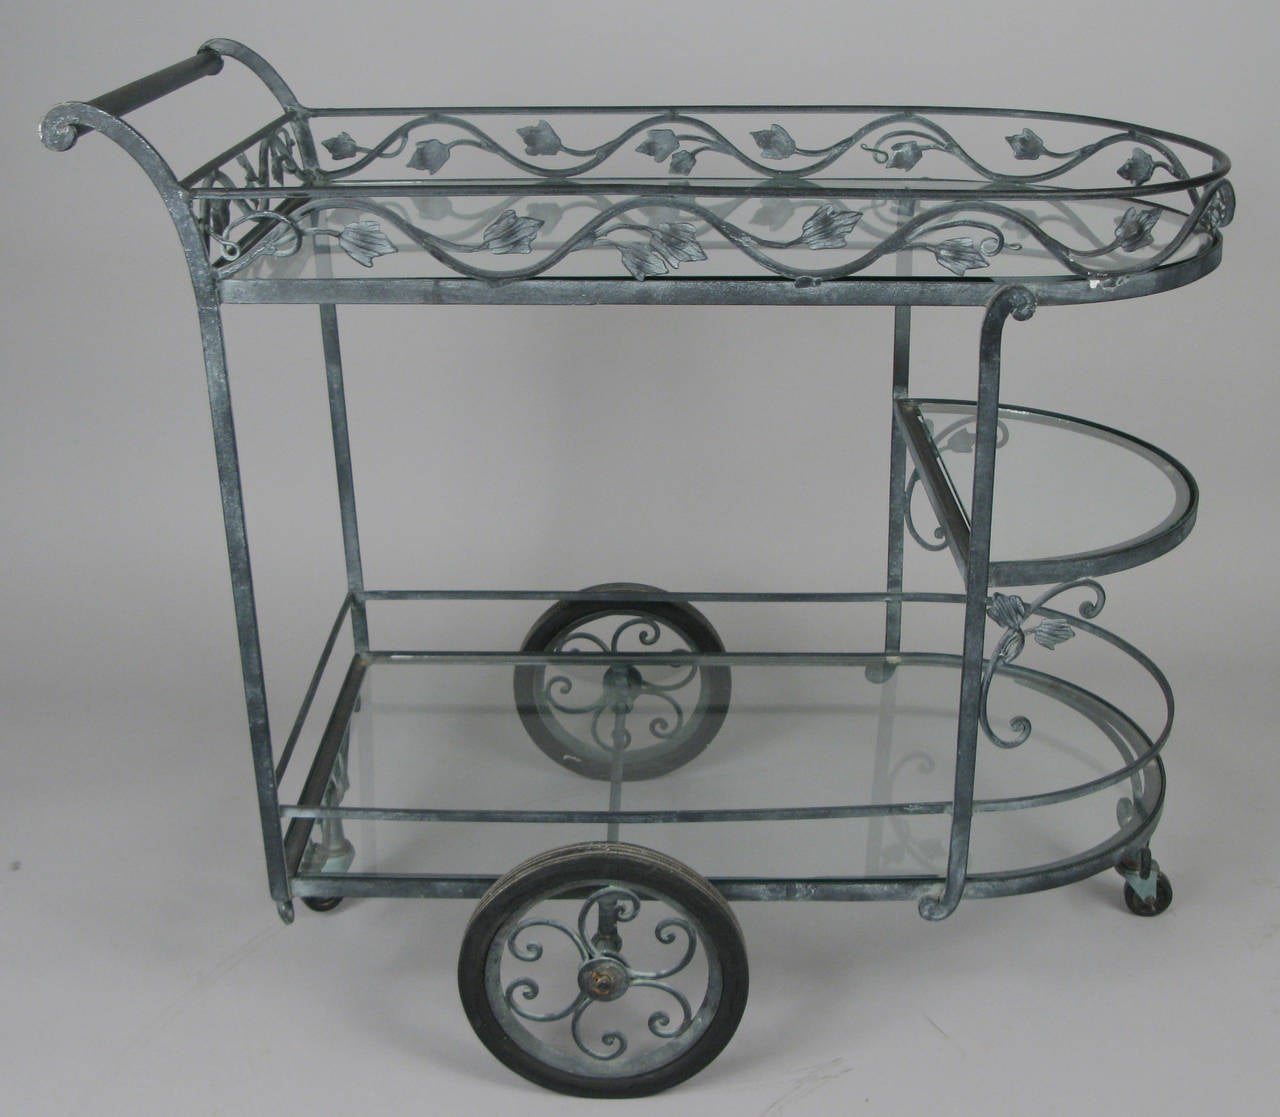 A beautiful vintage 1940s wrought iron rolling bar cart by Salterini. Very well made with a nice patina on the iron. Full size glass shelves above and below and a small glass shelf halfway up as well.